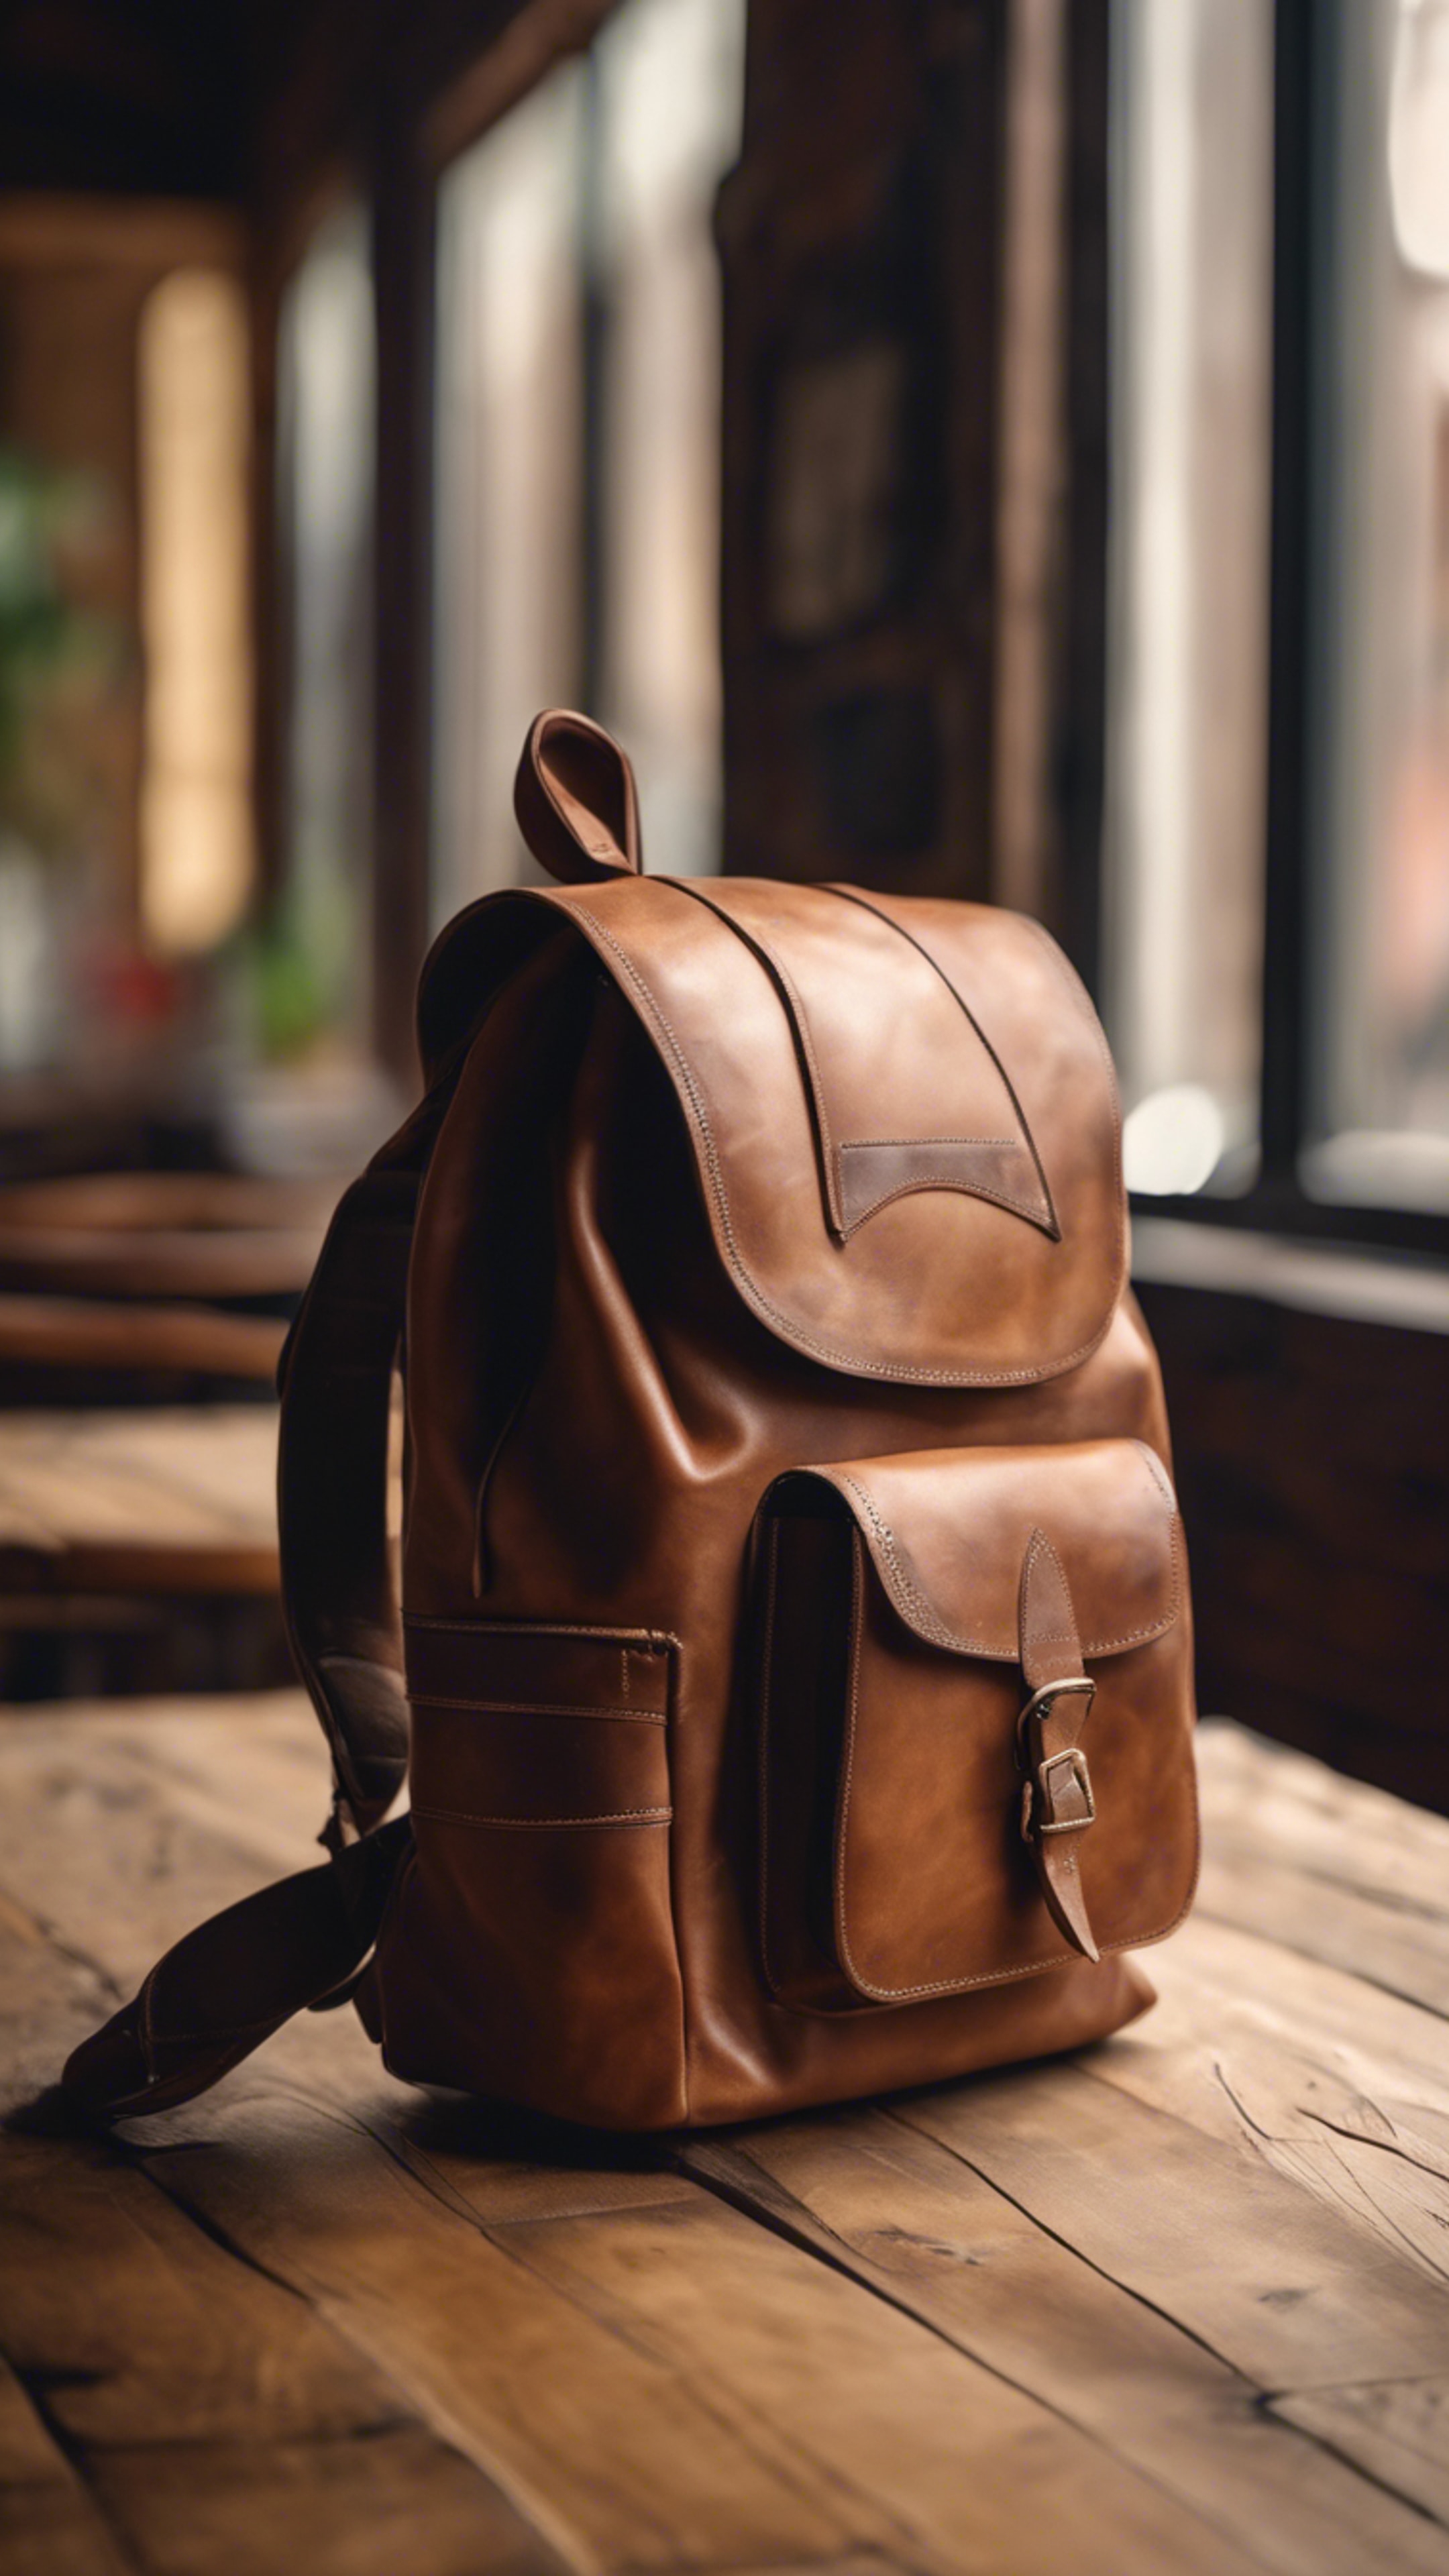 A vintage brown leather backpack sitting on a wooden table in a cozy café. Tapeta[7ce12483b5e34217b072]